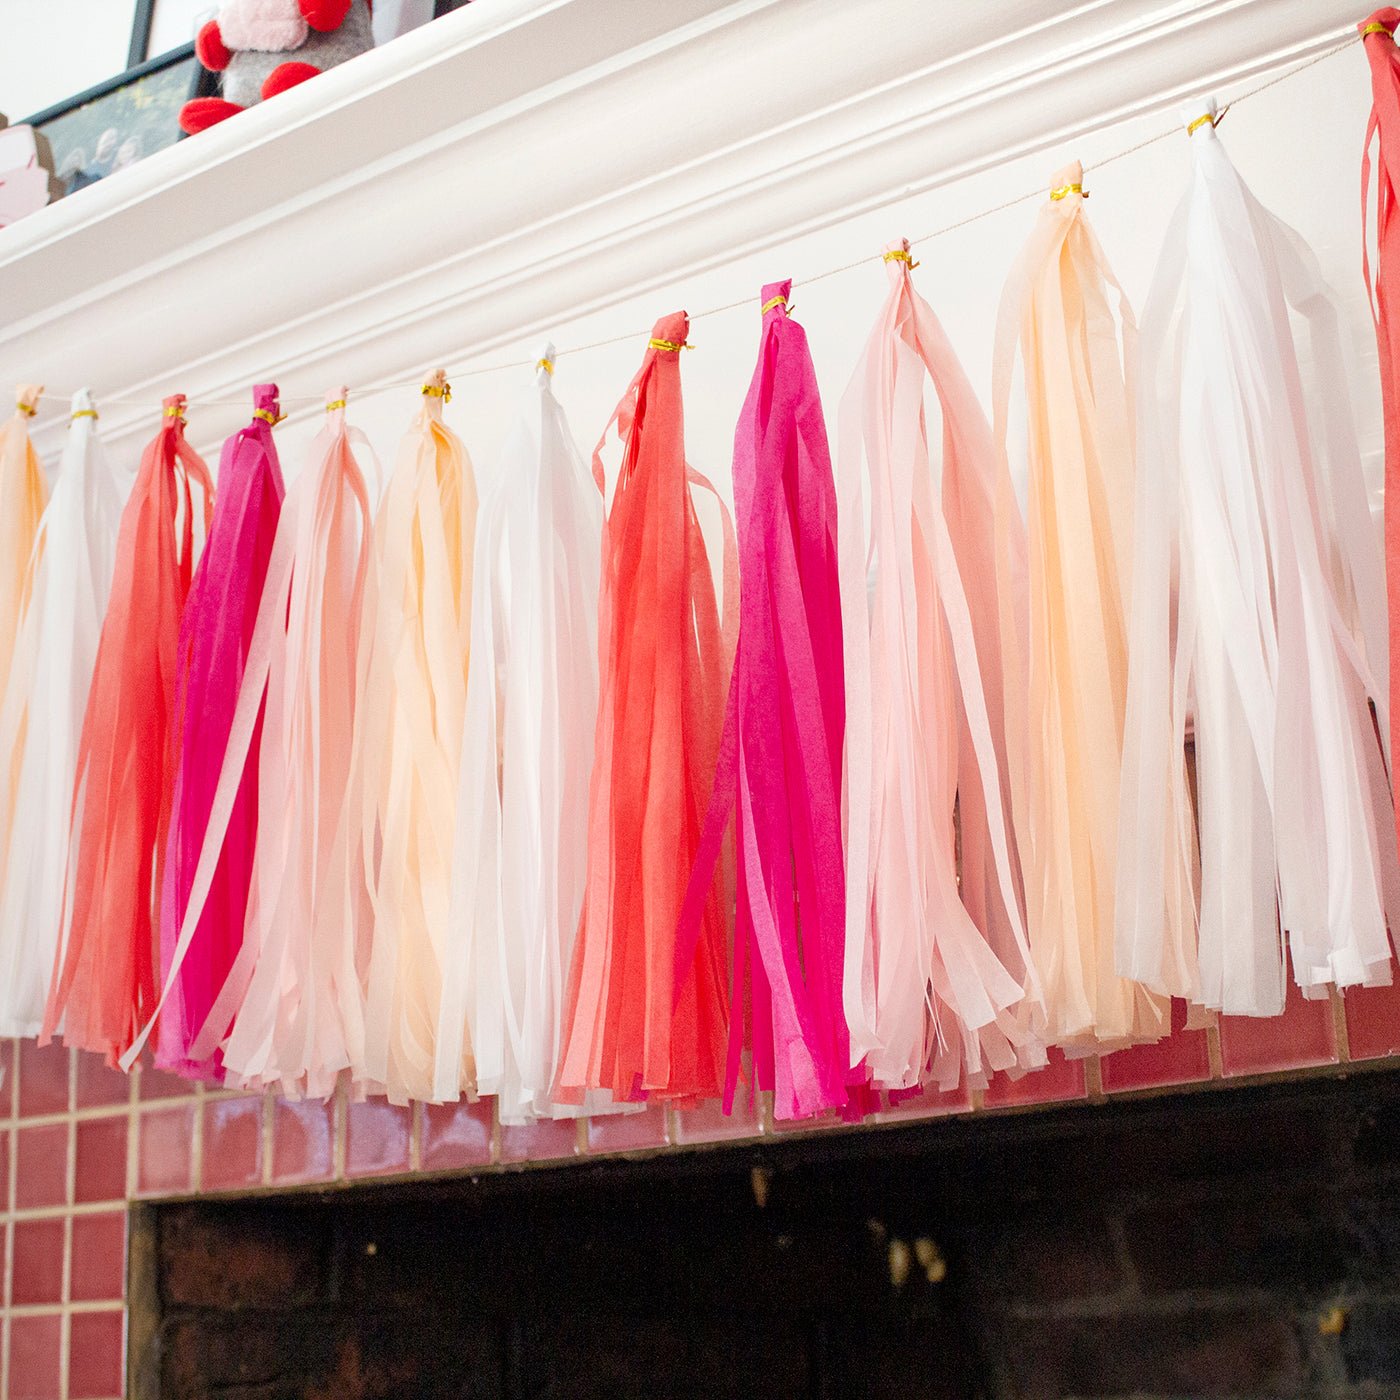 Hot Pink Light Pink Tissue Paper Tassels Party Tassel Garland Banner for  Party Decorations, DIY Kits,15PCS